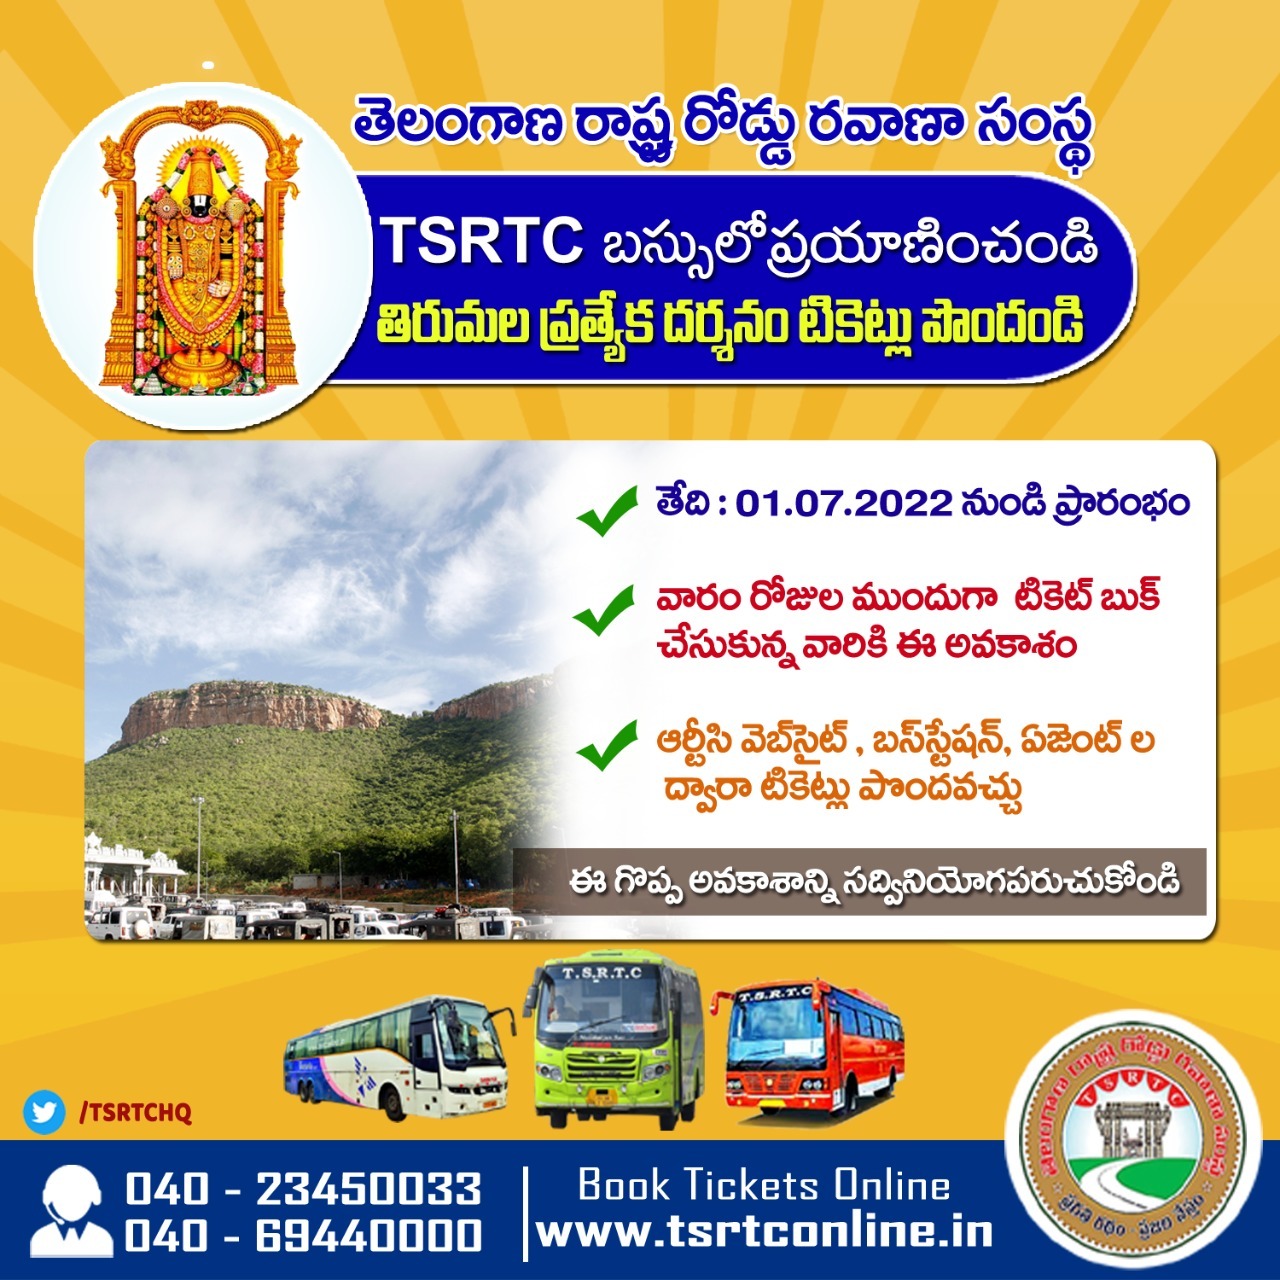 TSRTC Official Website for Online Bus Ticket Booking - Book Bus ...